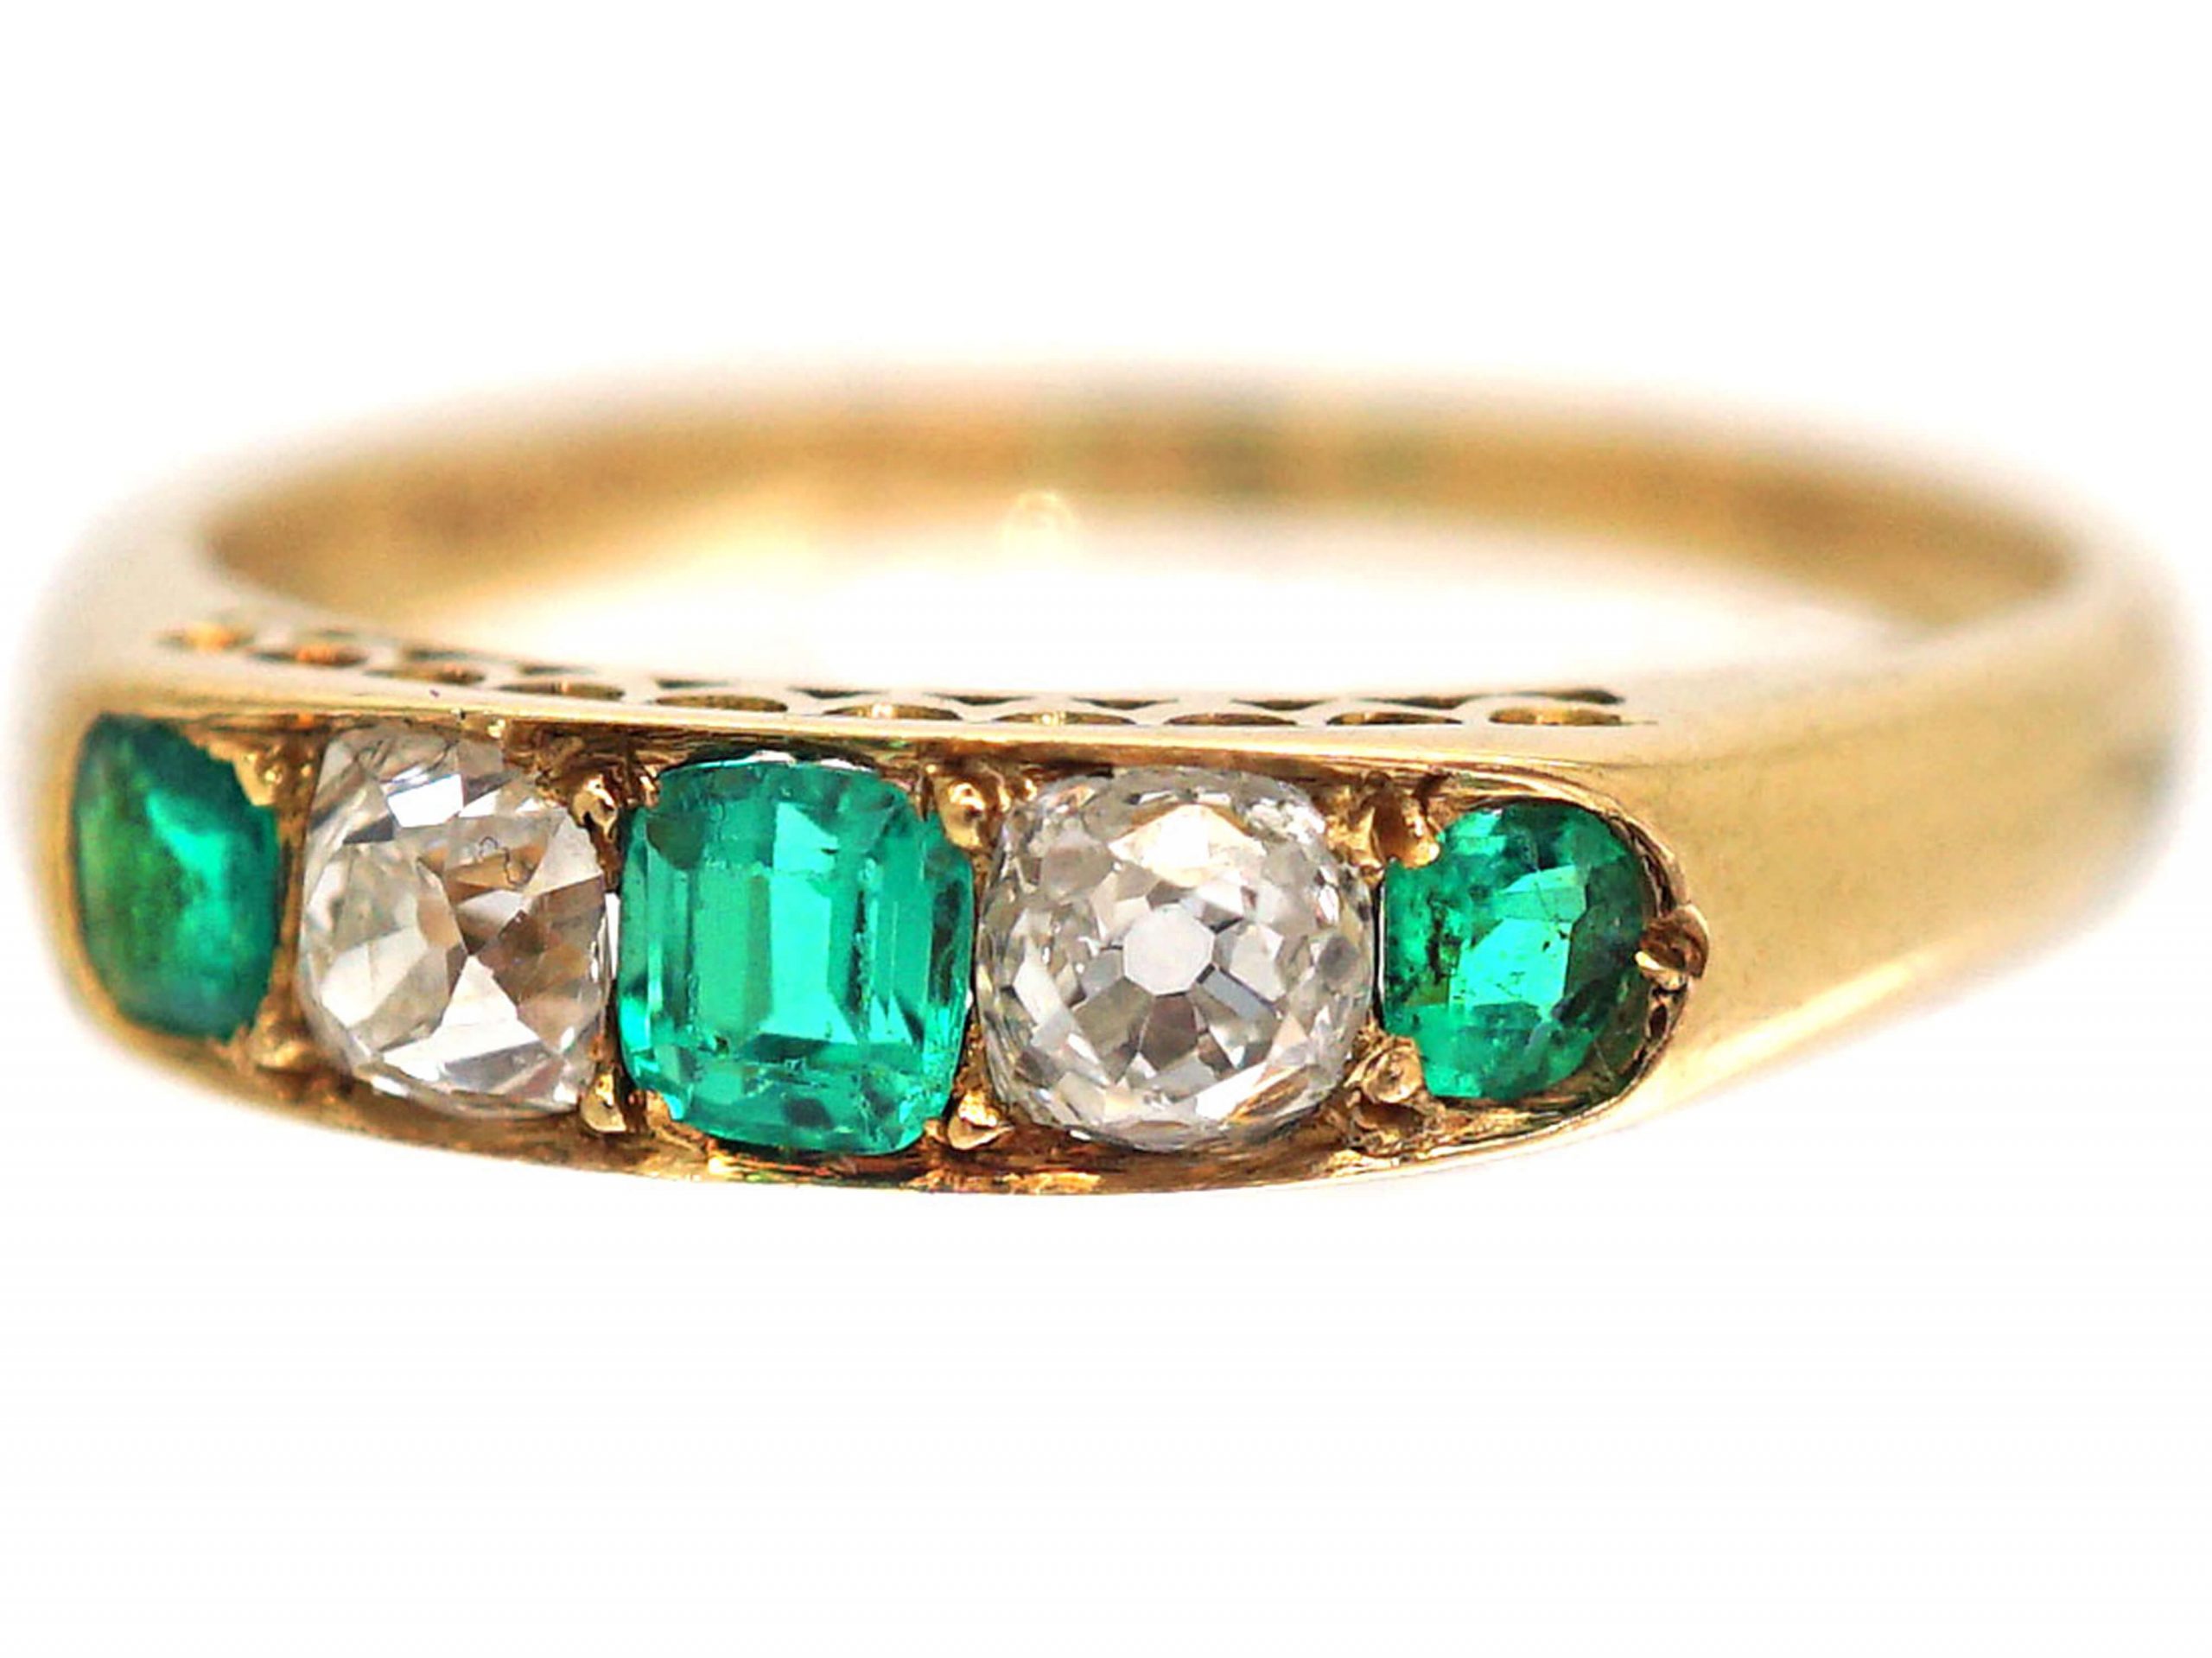 Edwardian 18ct Gold, Diamond & Emerald Ring (490R) | The Antique ...